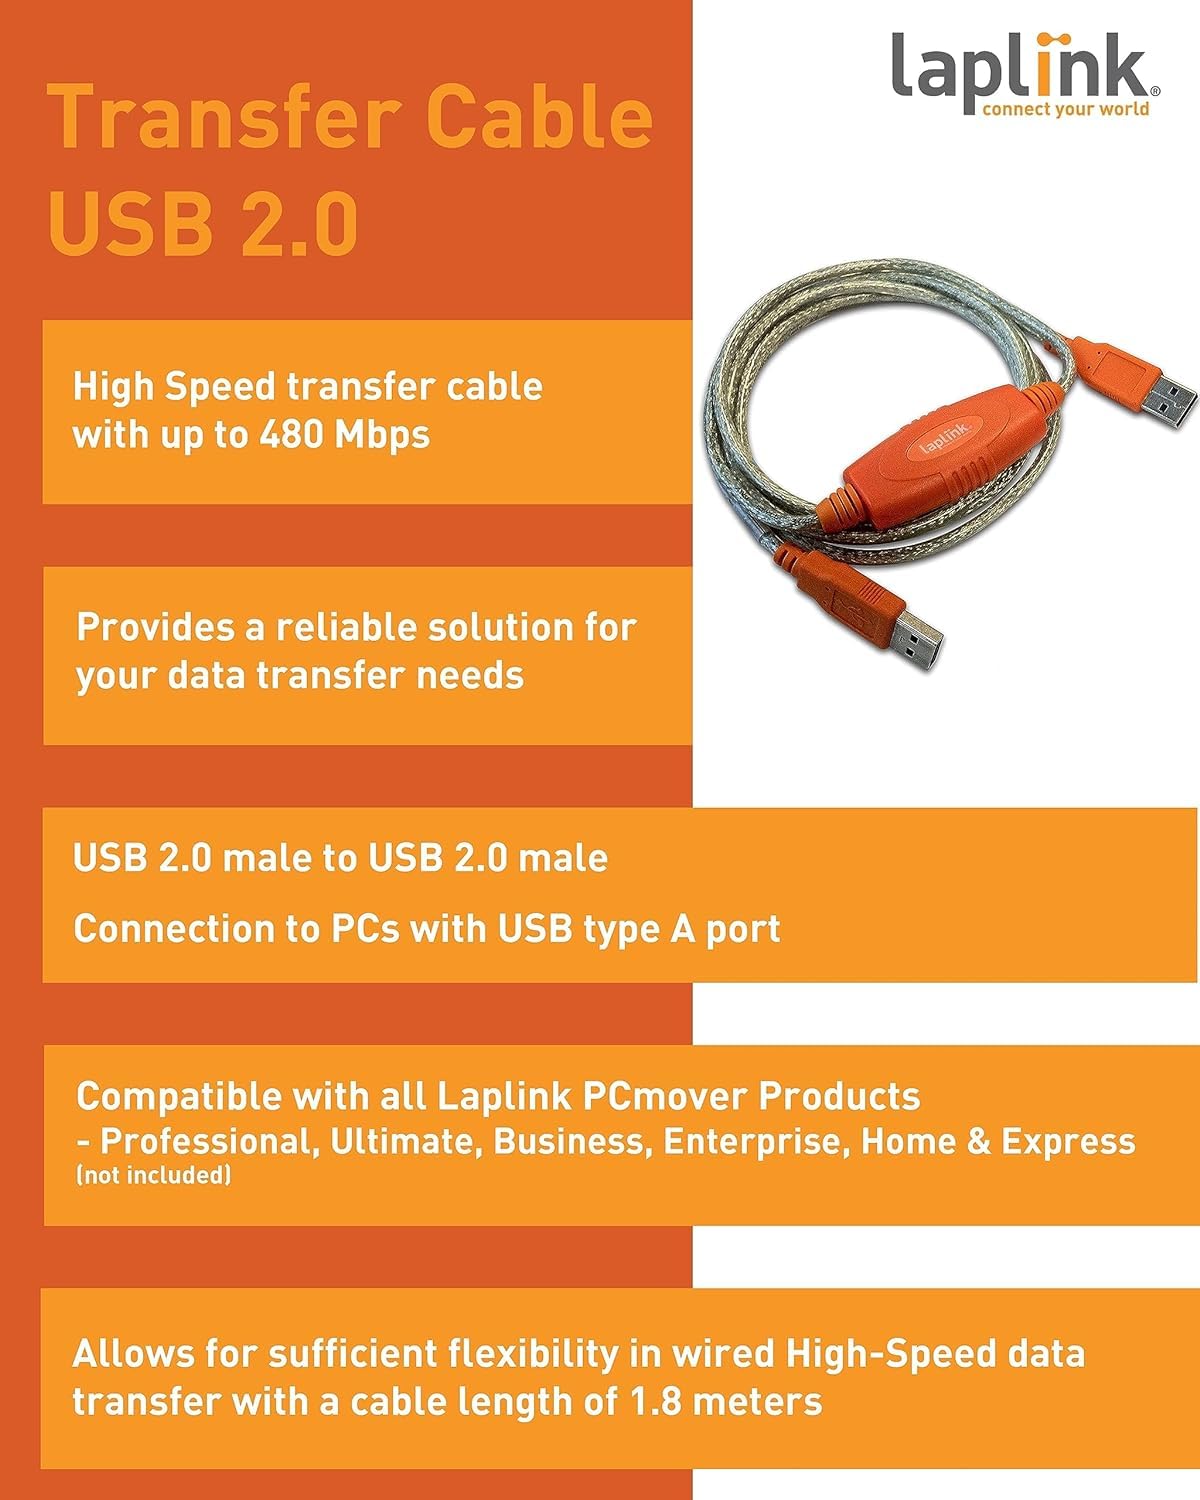 Laplink 6' USB 2.0 High-Speed Transfer Cable for PCmover